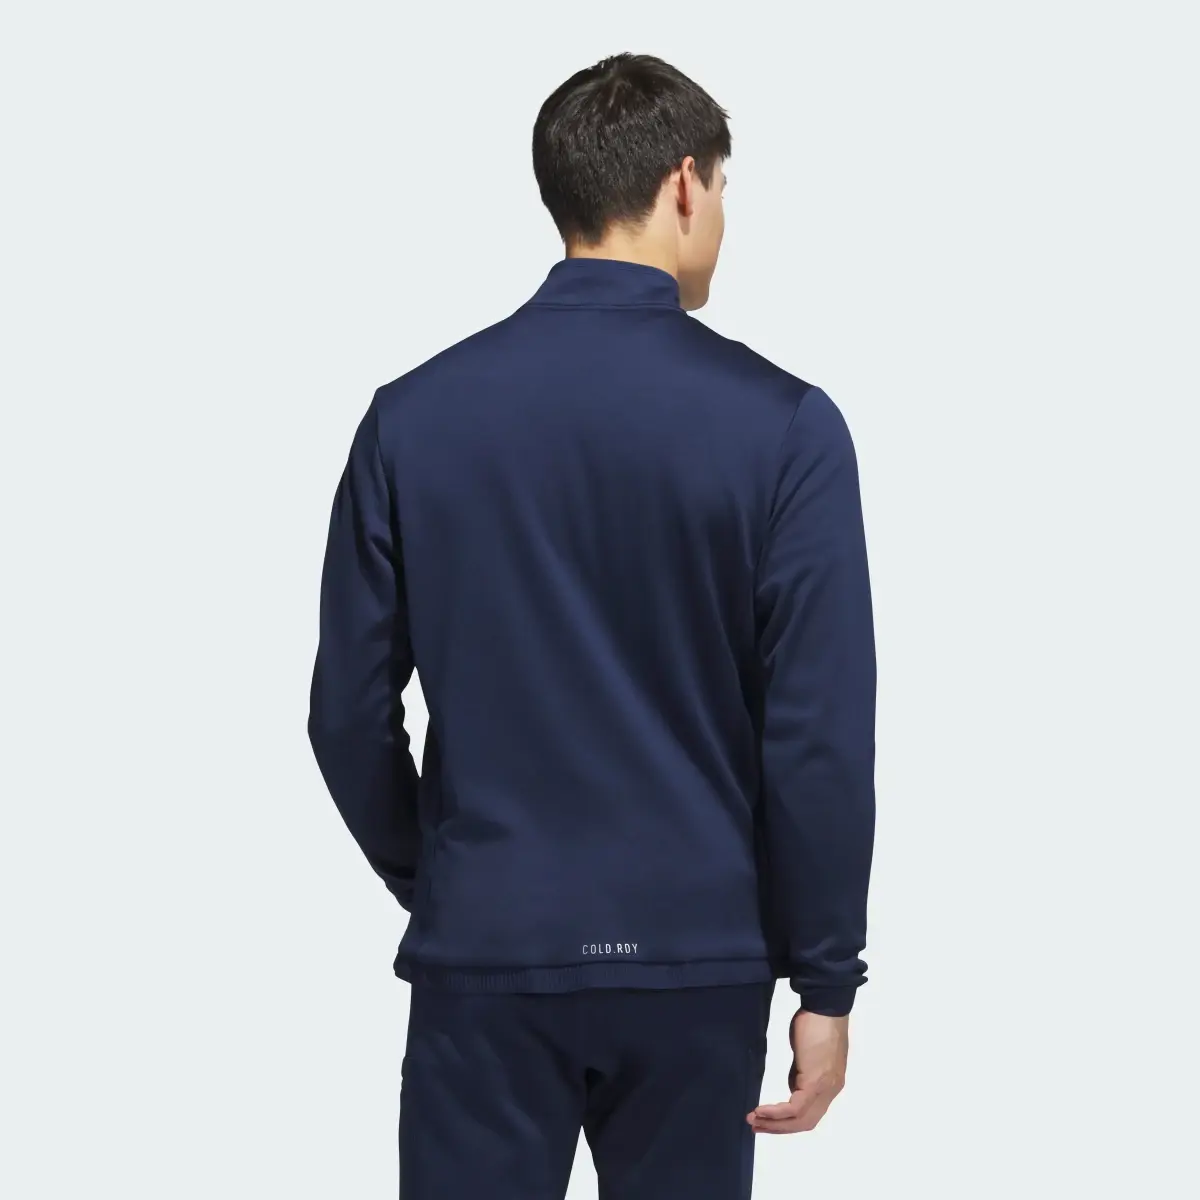 Adidas COLD.RDY Full-Zip Jacket. 3